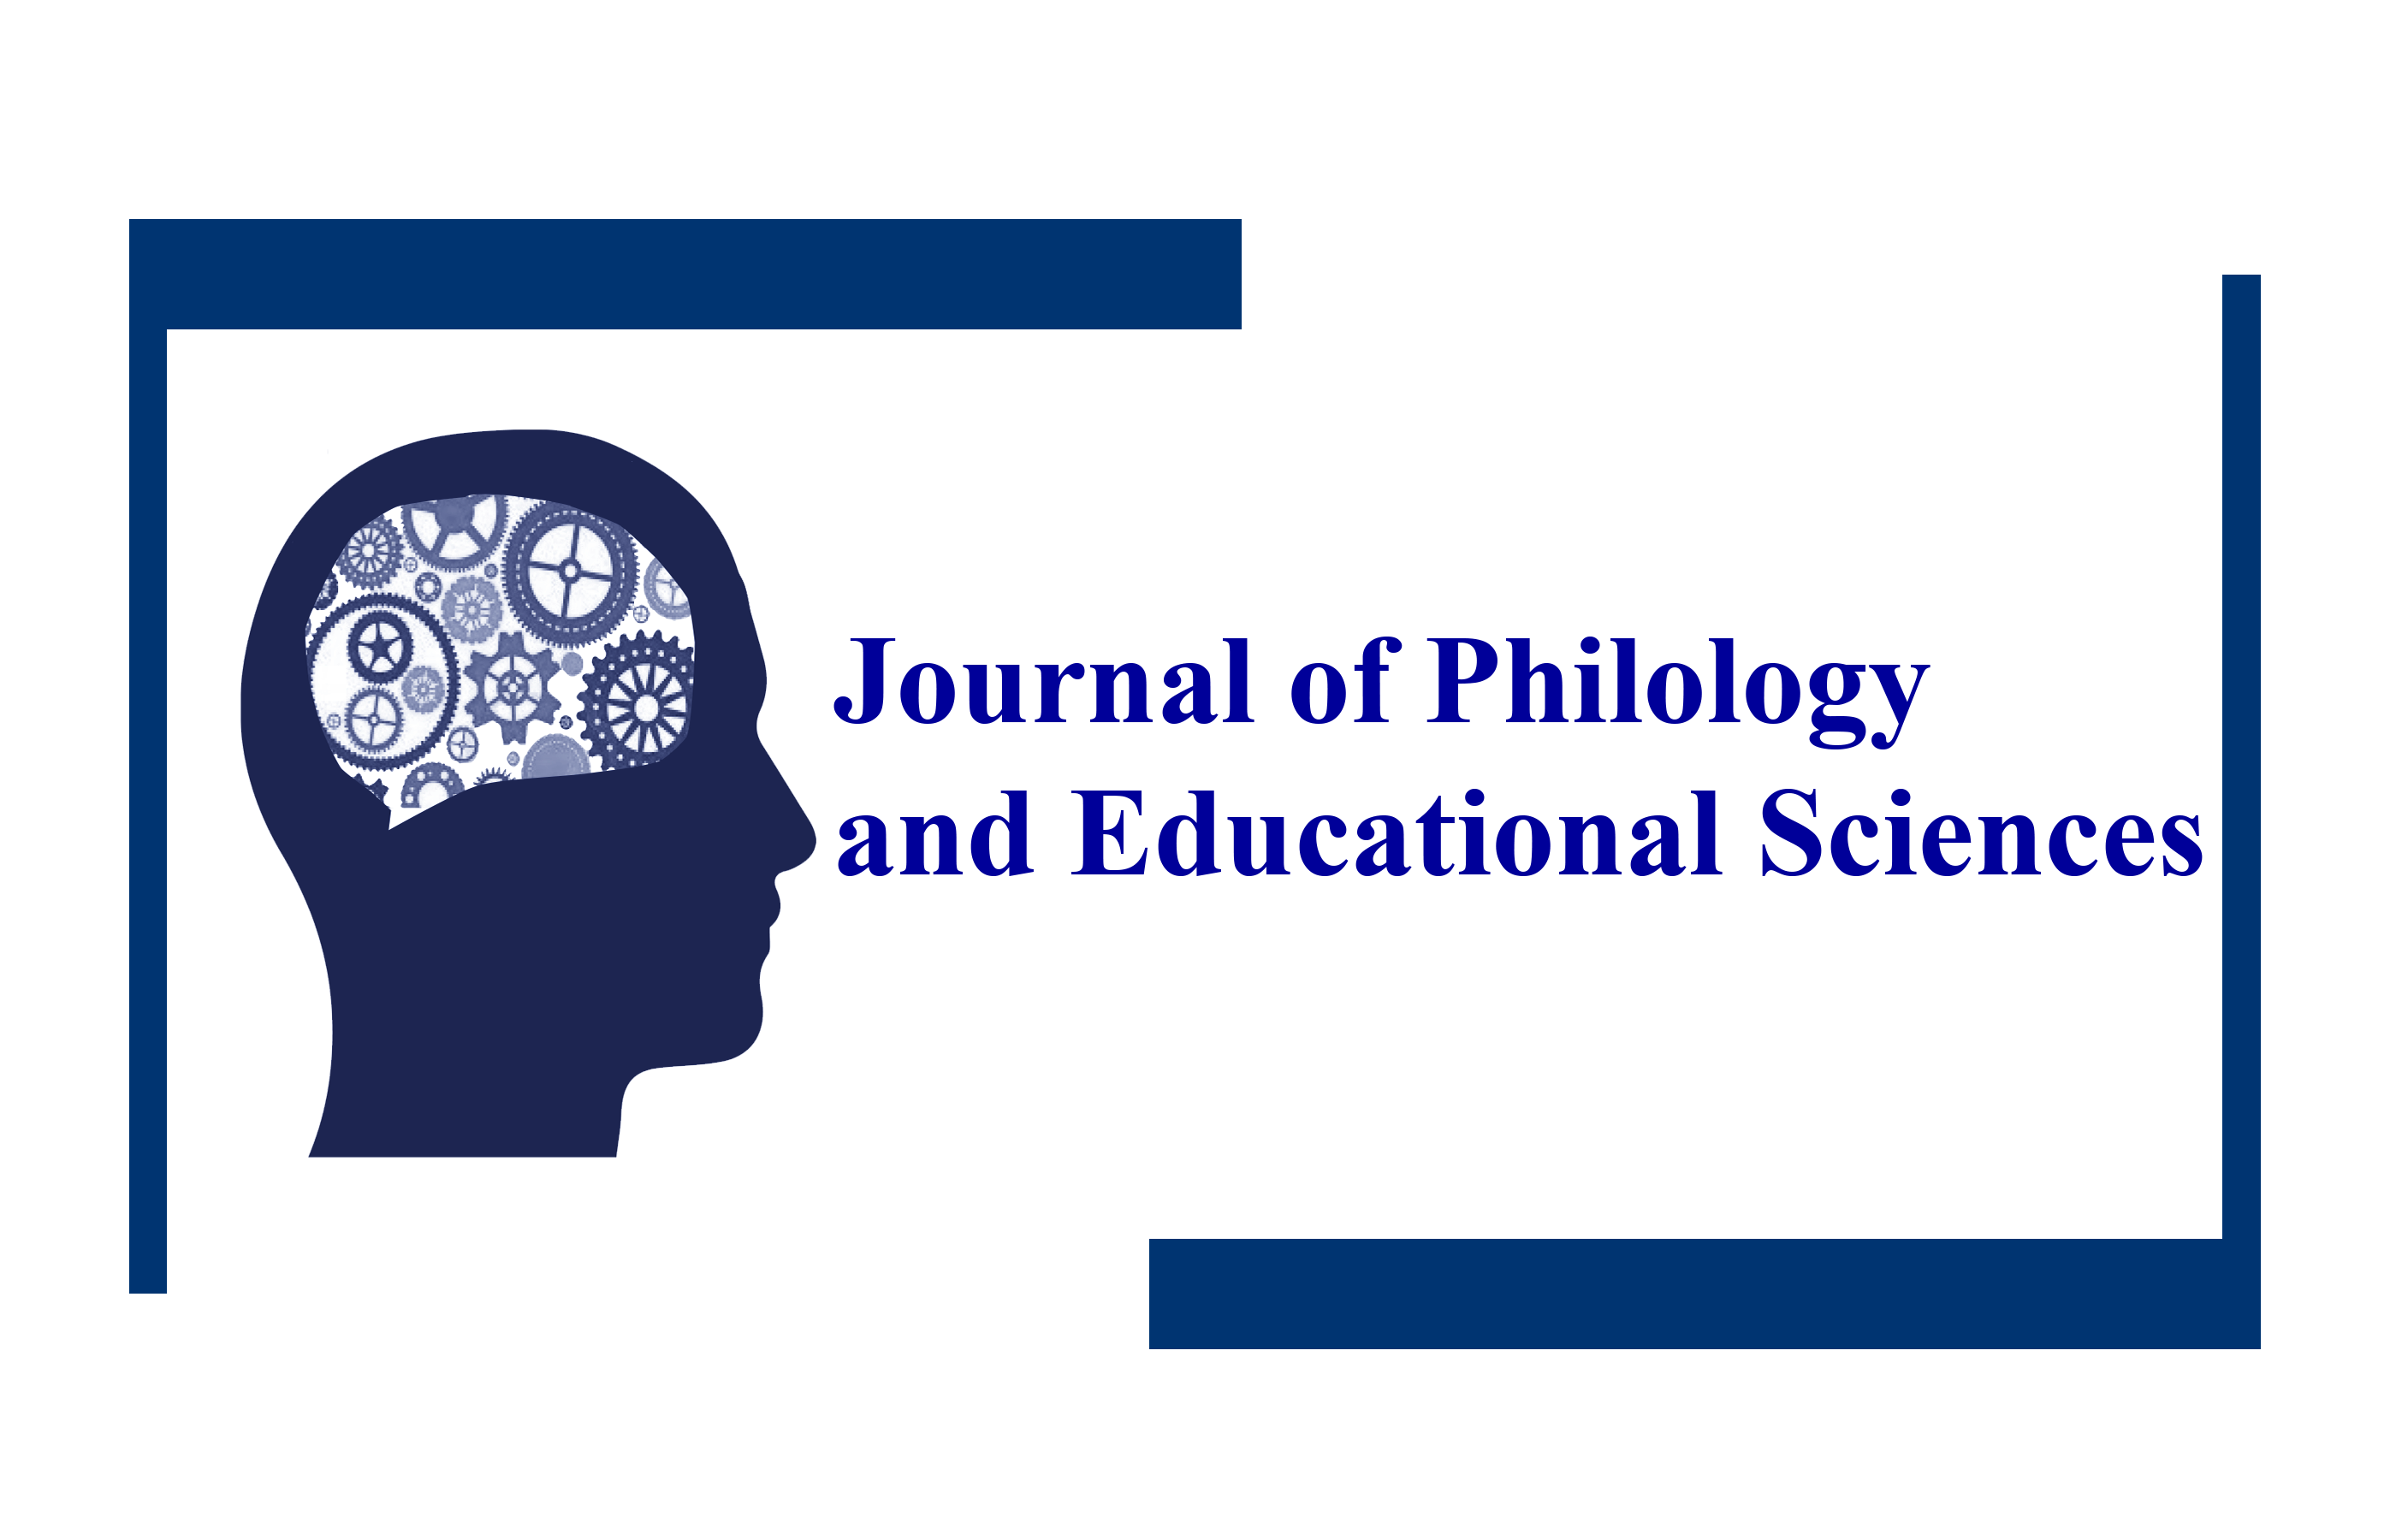 Journal of Philology and Educational Sciences